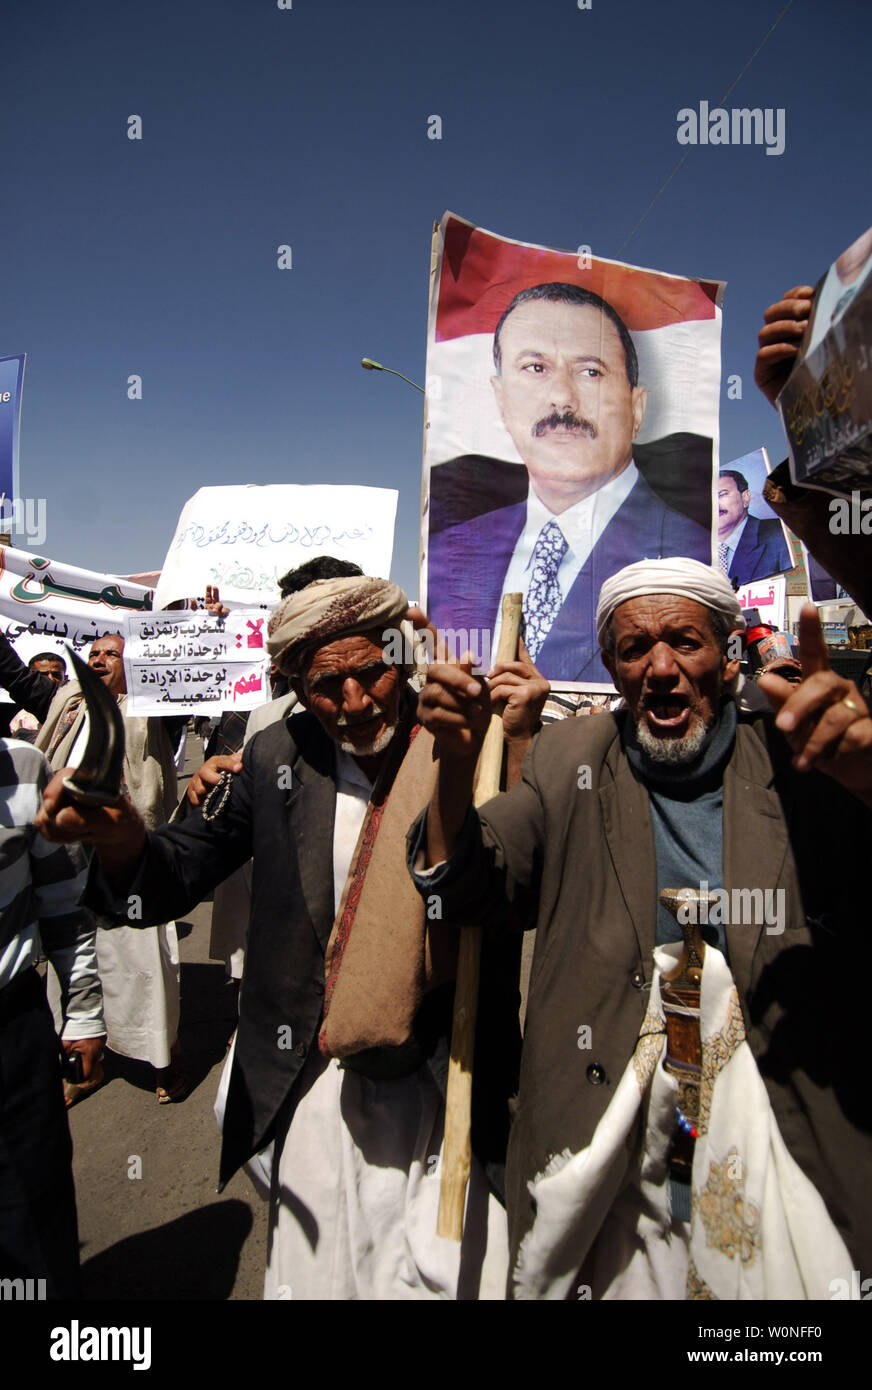 Yemeni protesters shout slogans in support of President Ali Abdullah Saleh in the capital Sanaa on February 25, 2011. The president has resisted pressure to resign but has promised not to seek re-election when his current term ends in 2013 and has promised political reforms.  UPI Stock Photo